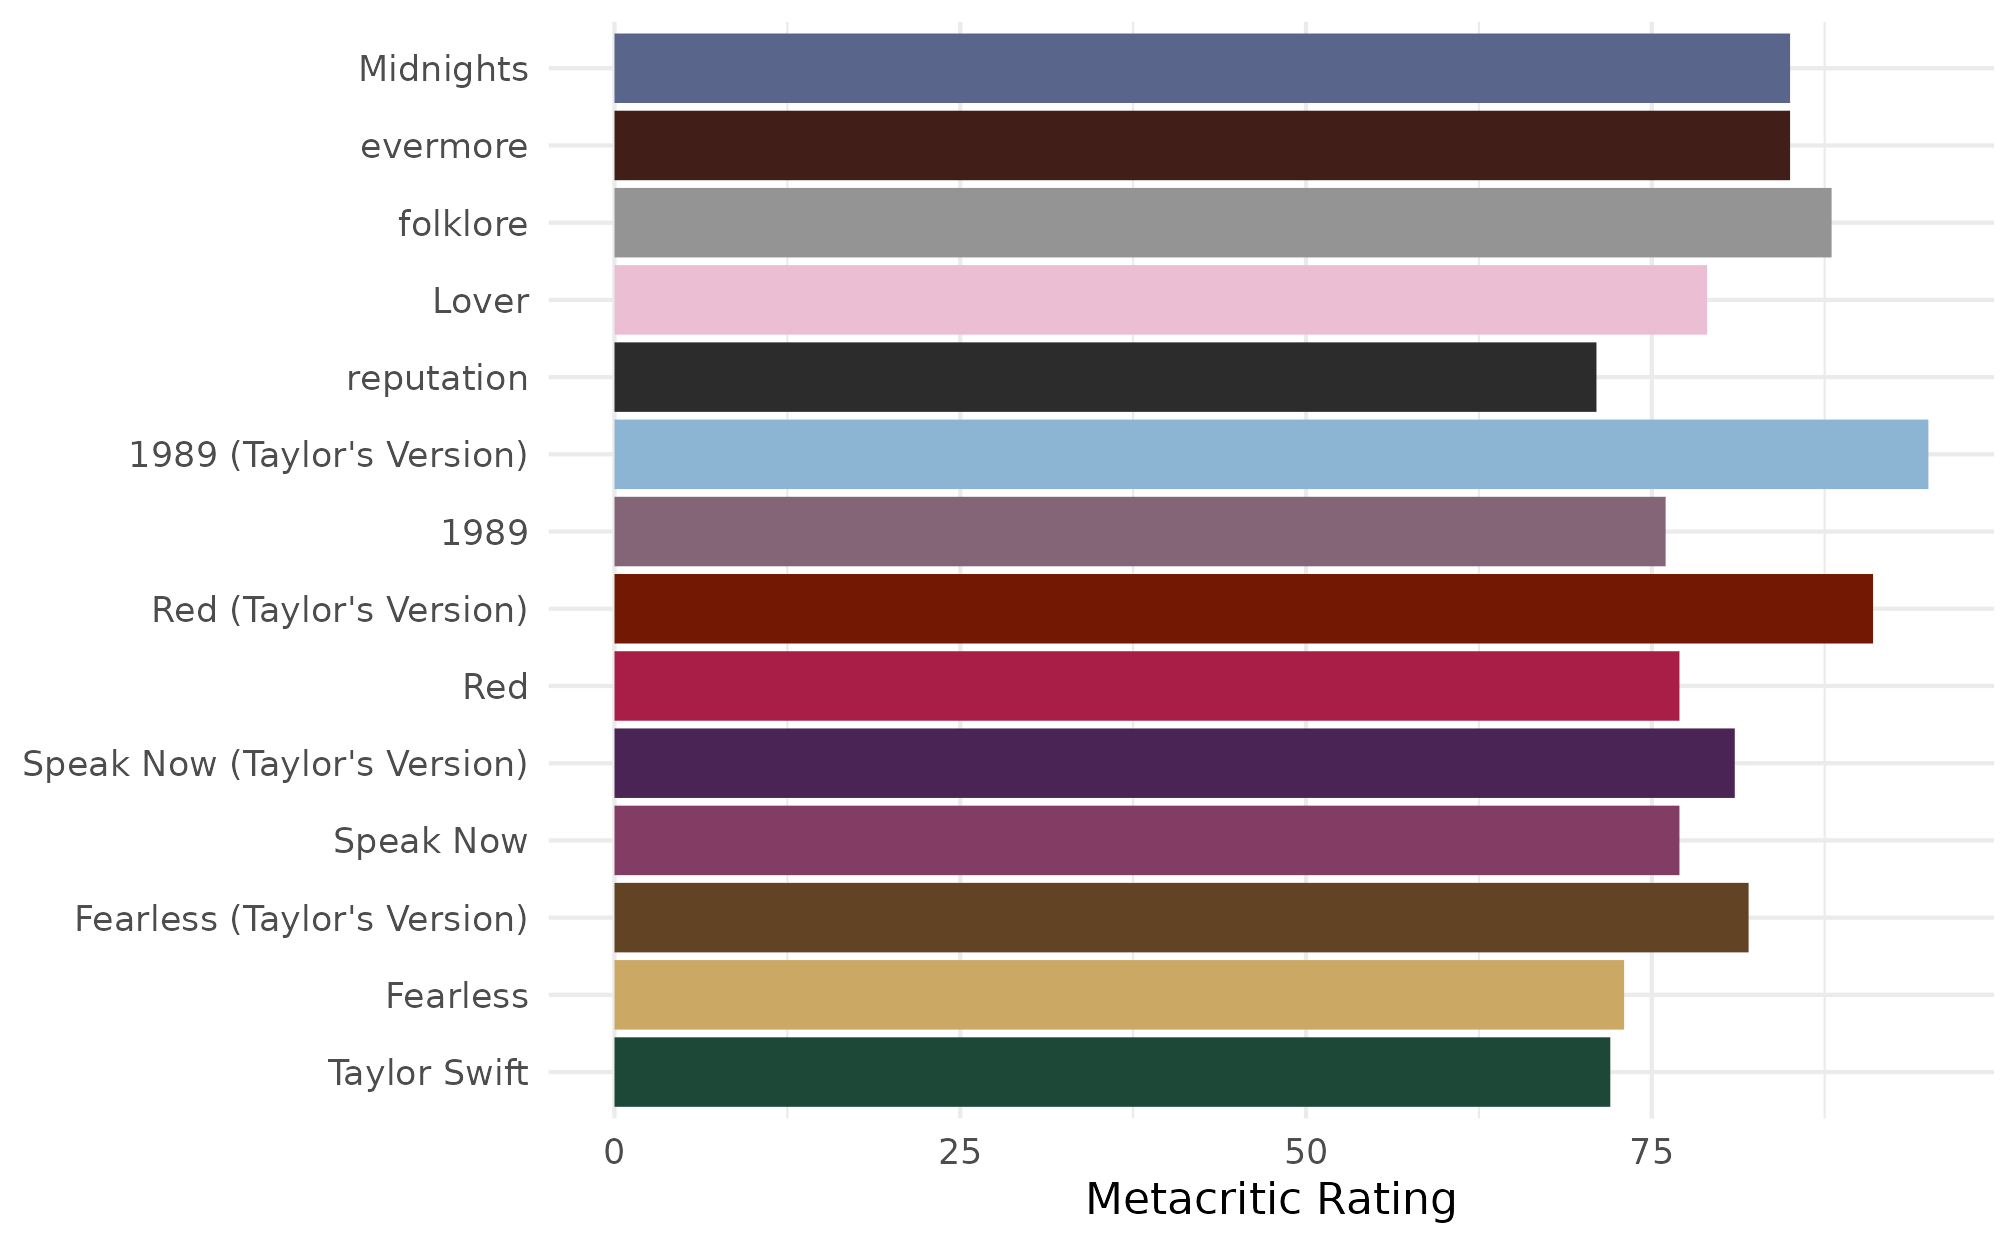 The same bar graph as the previous image, instead of using the default colors, each bar for each album is filled with a color from that album's cover.